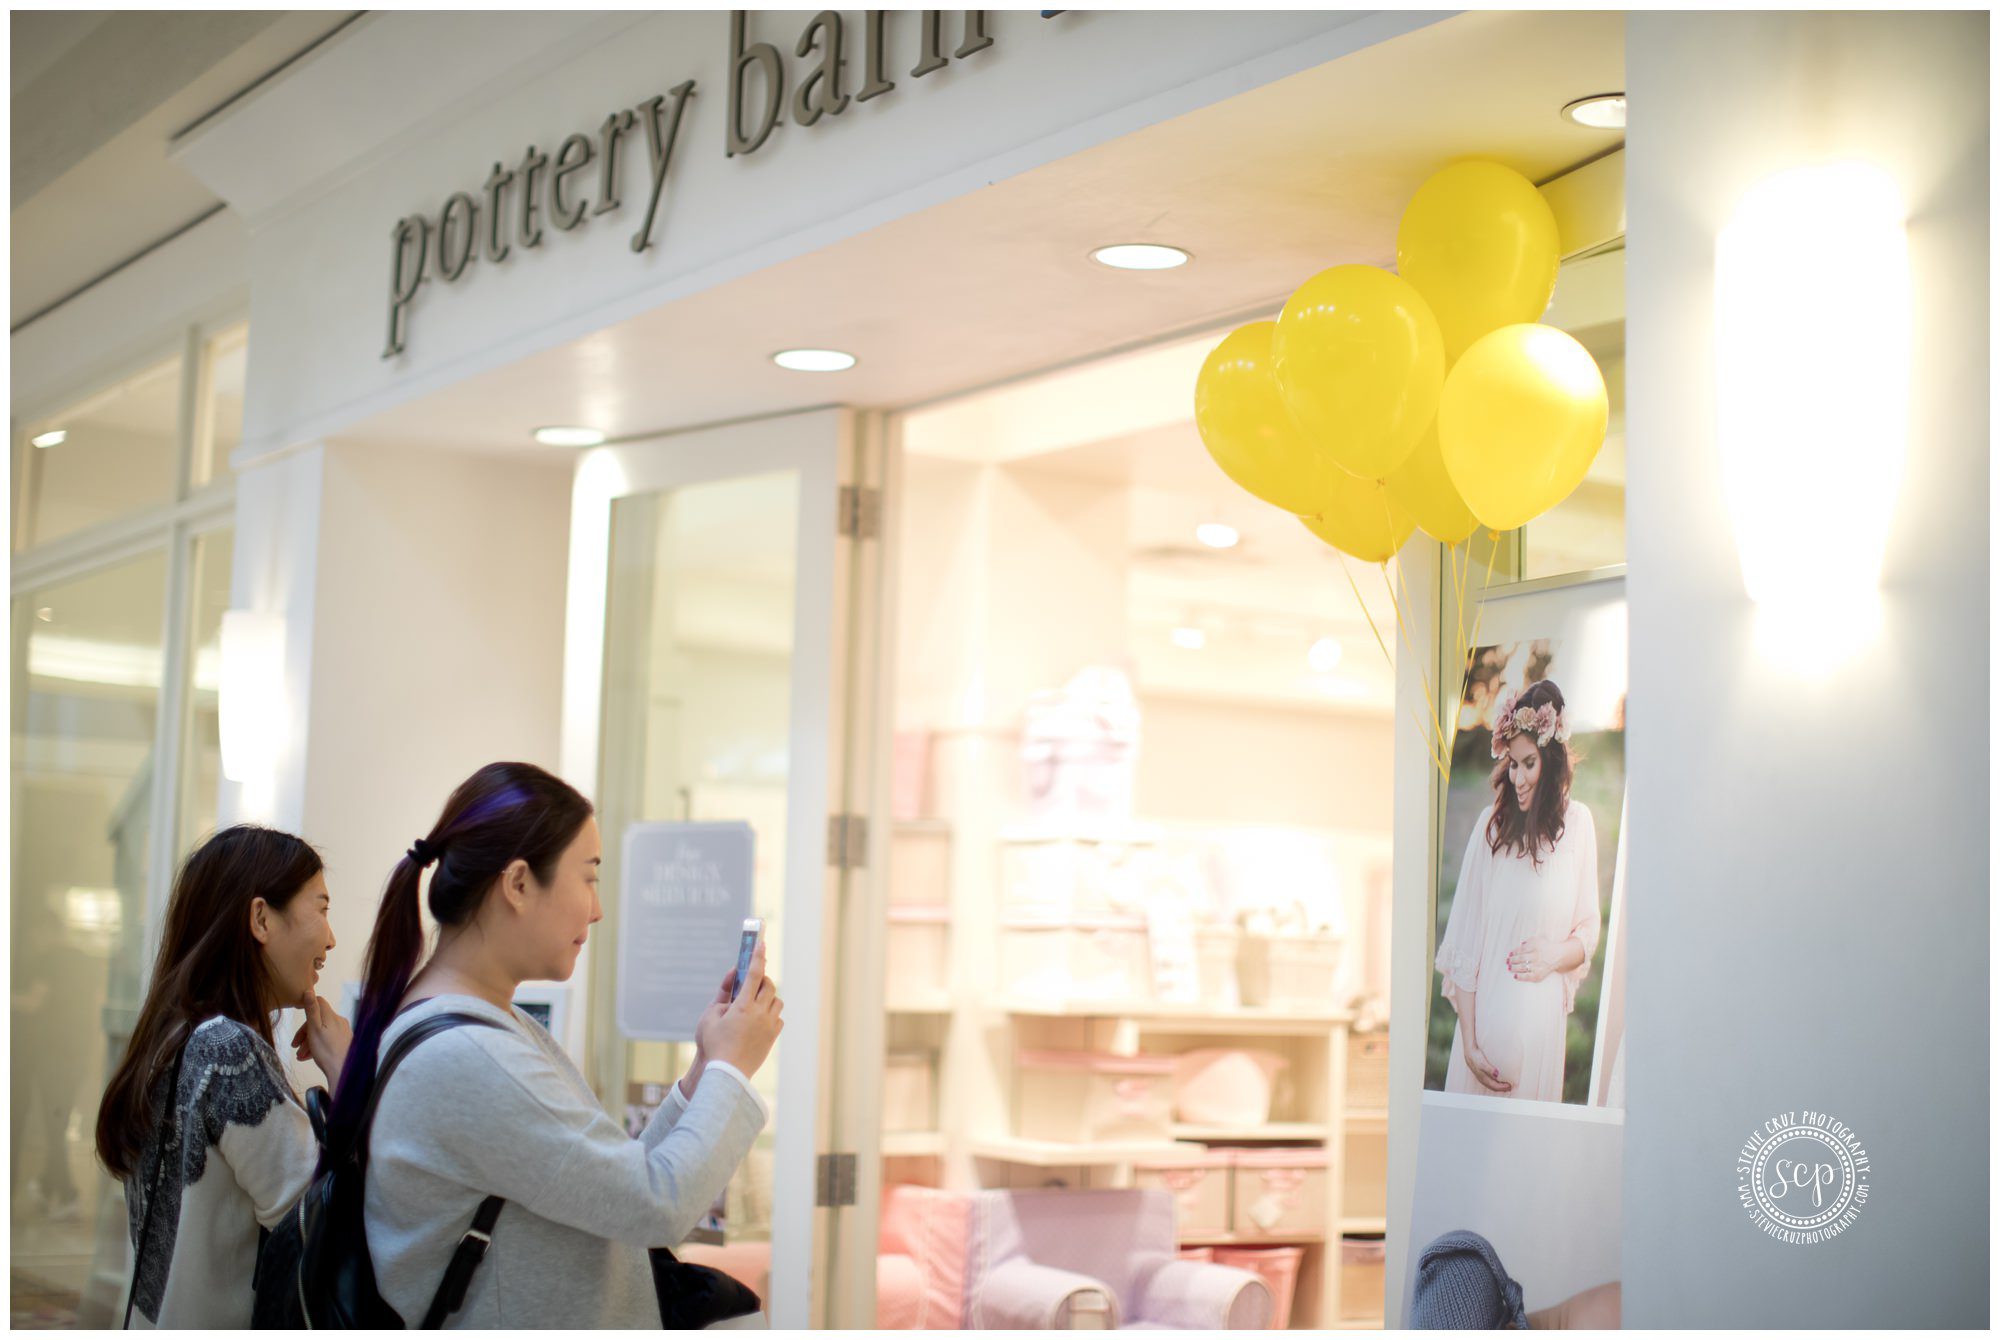 Pottery Barn Kids event and photos 